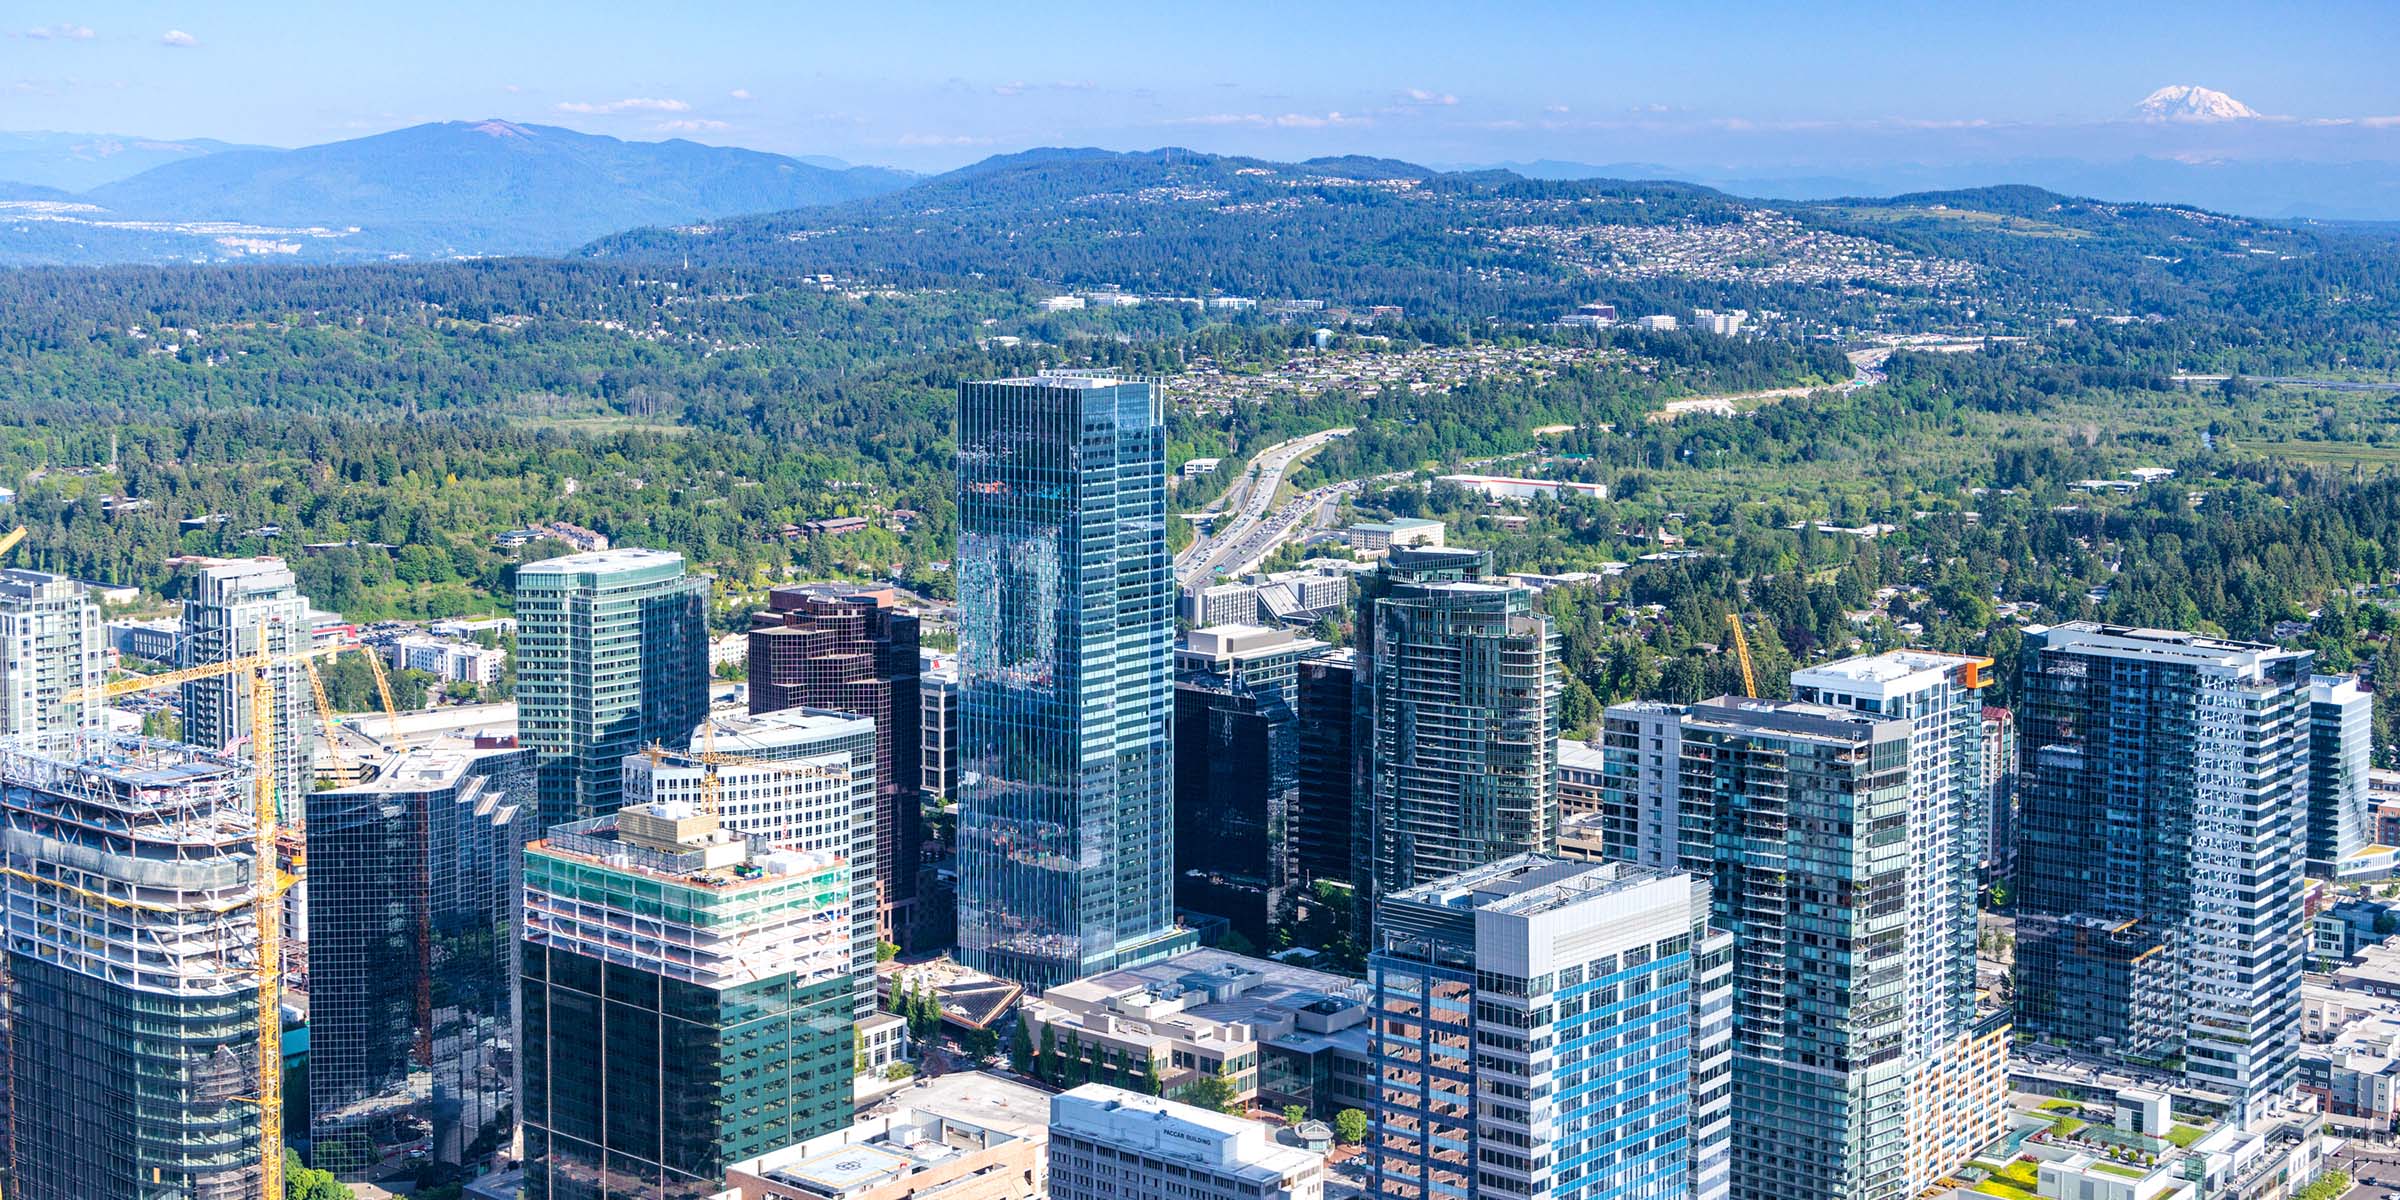 Aerial view of 555 Tower and Mt Rainier